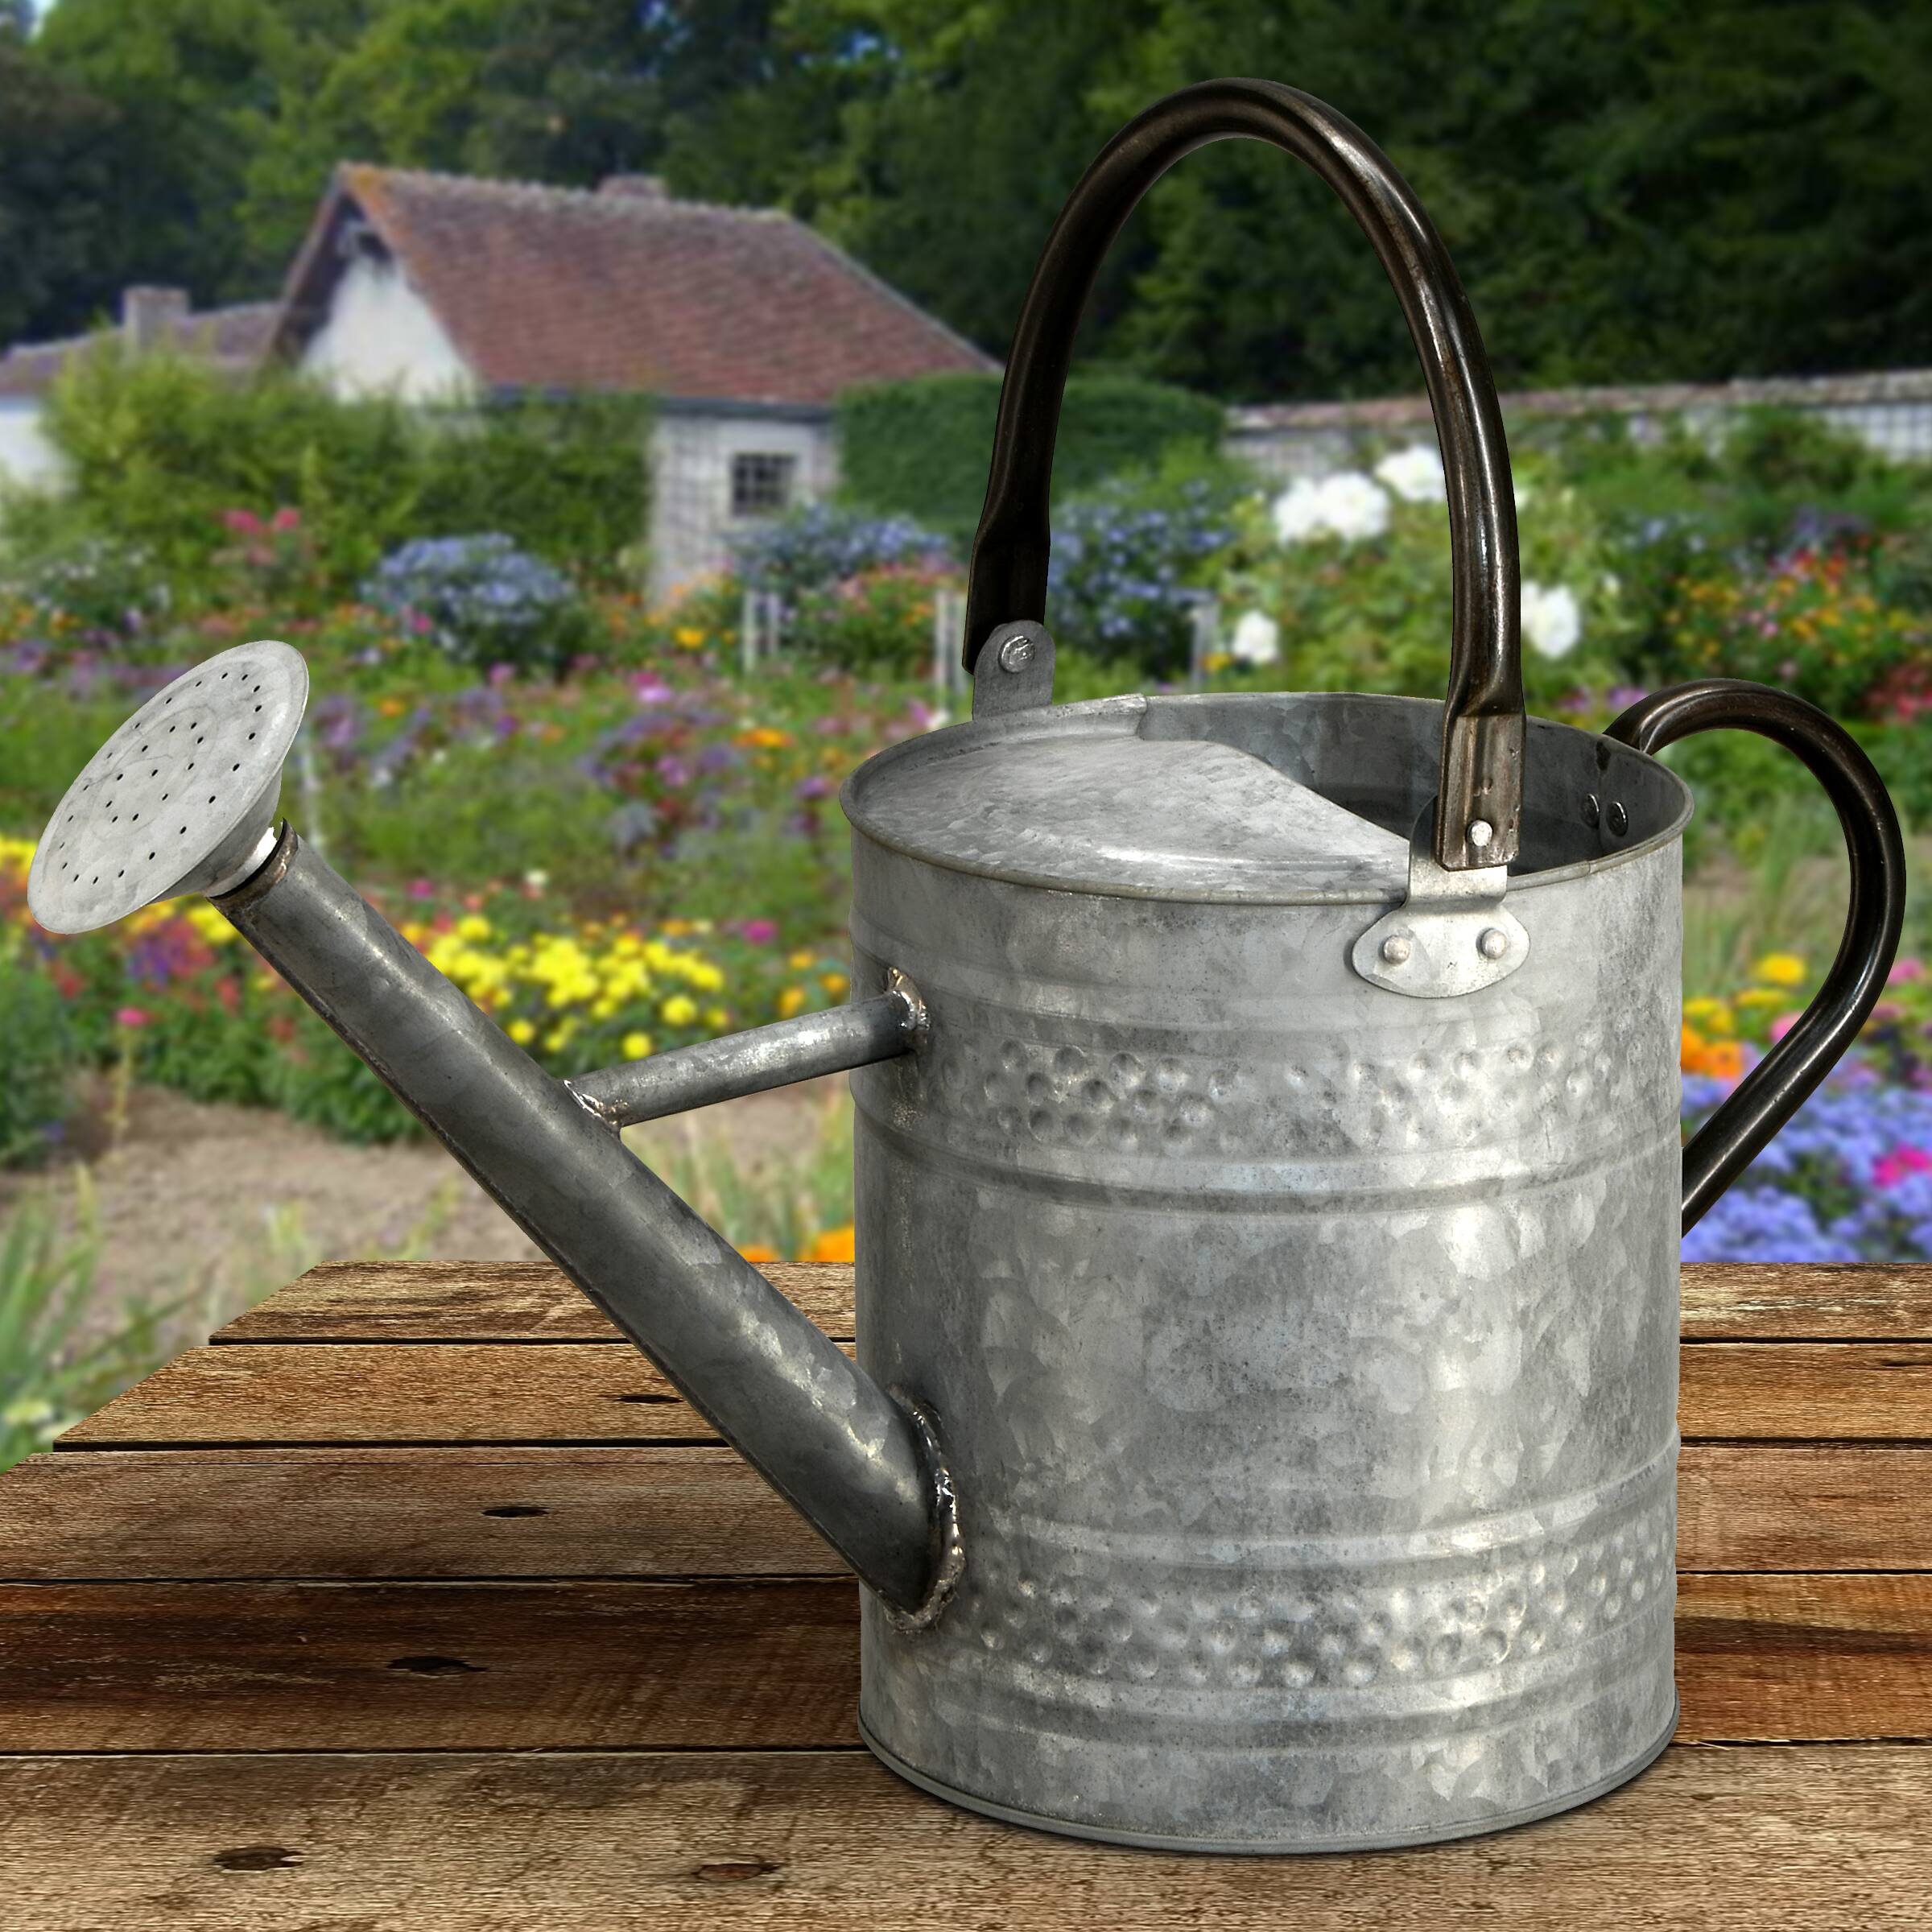 RUSTIC DECOR Vintage Tin Watering Can FRESH FLOWER MARKET Rustic Home Decor 